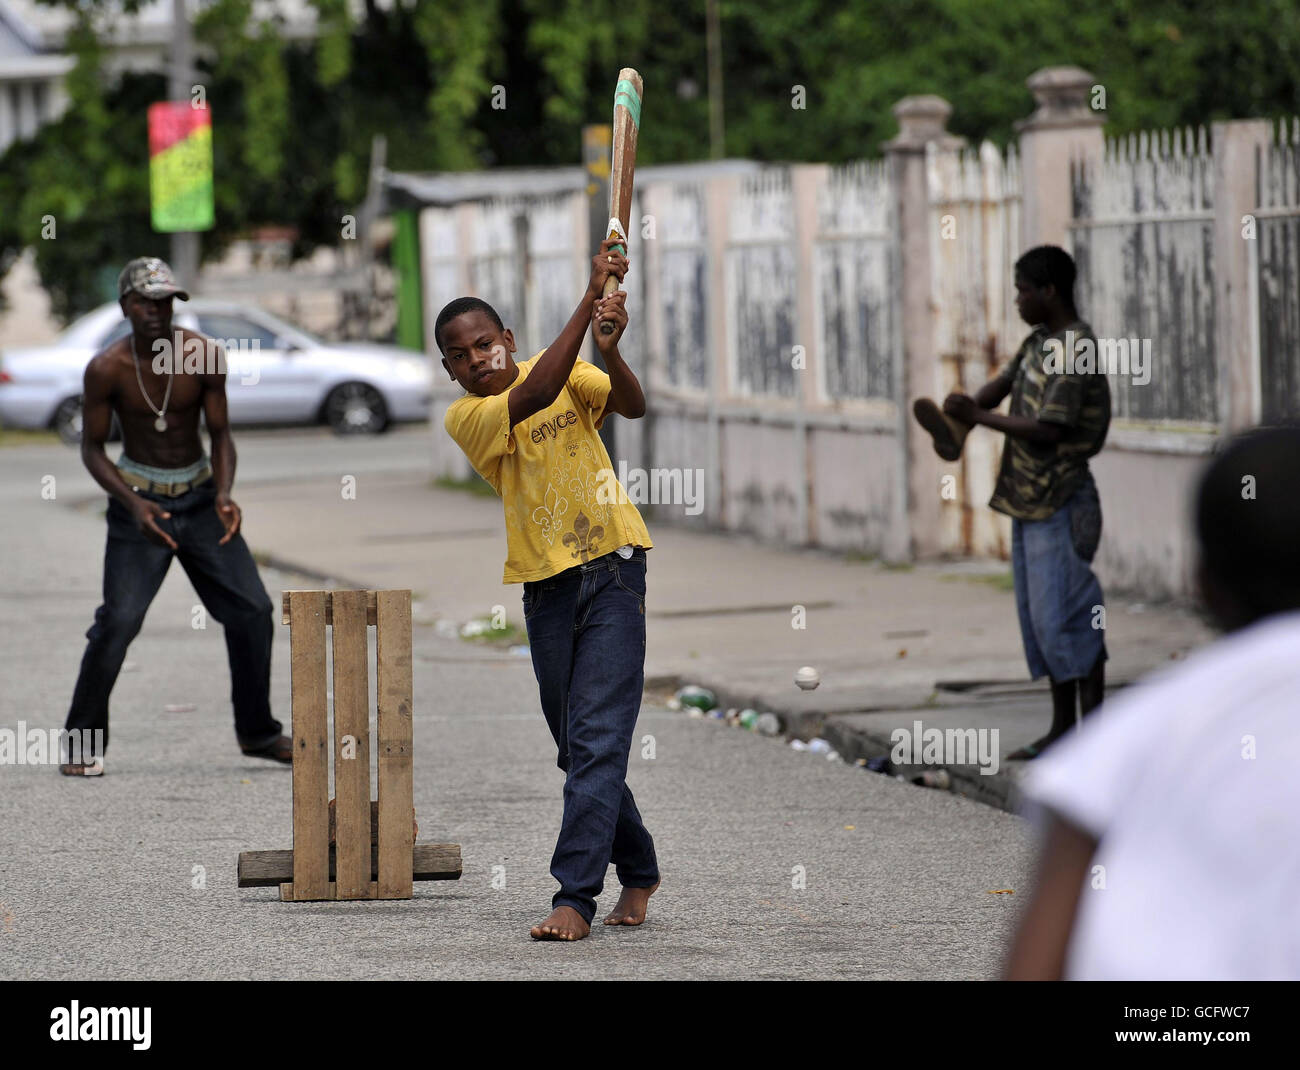 A young boy bats in a street cricket match in Georgetown, Guyana. Stock Photo